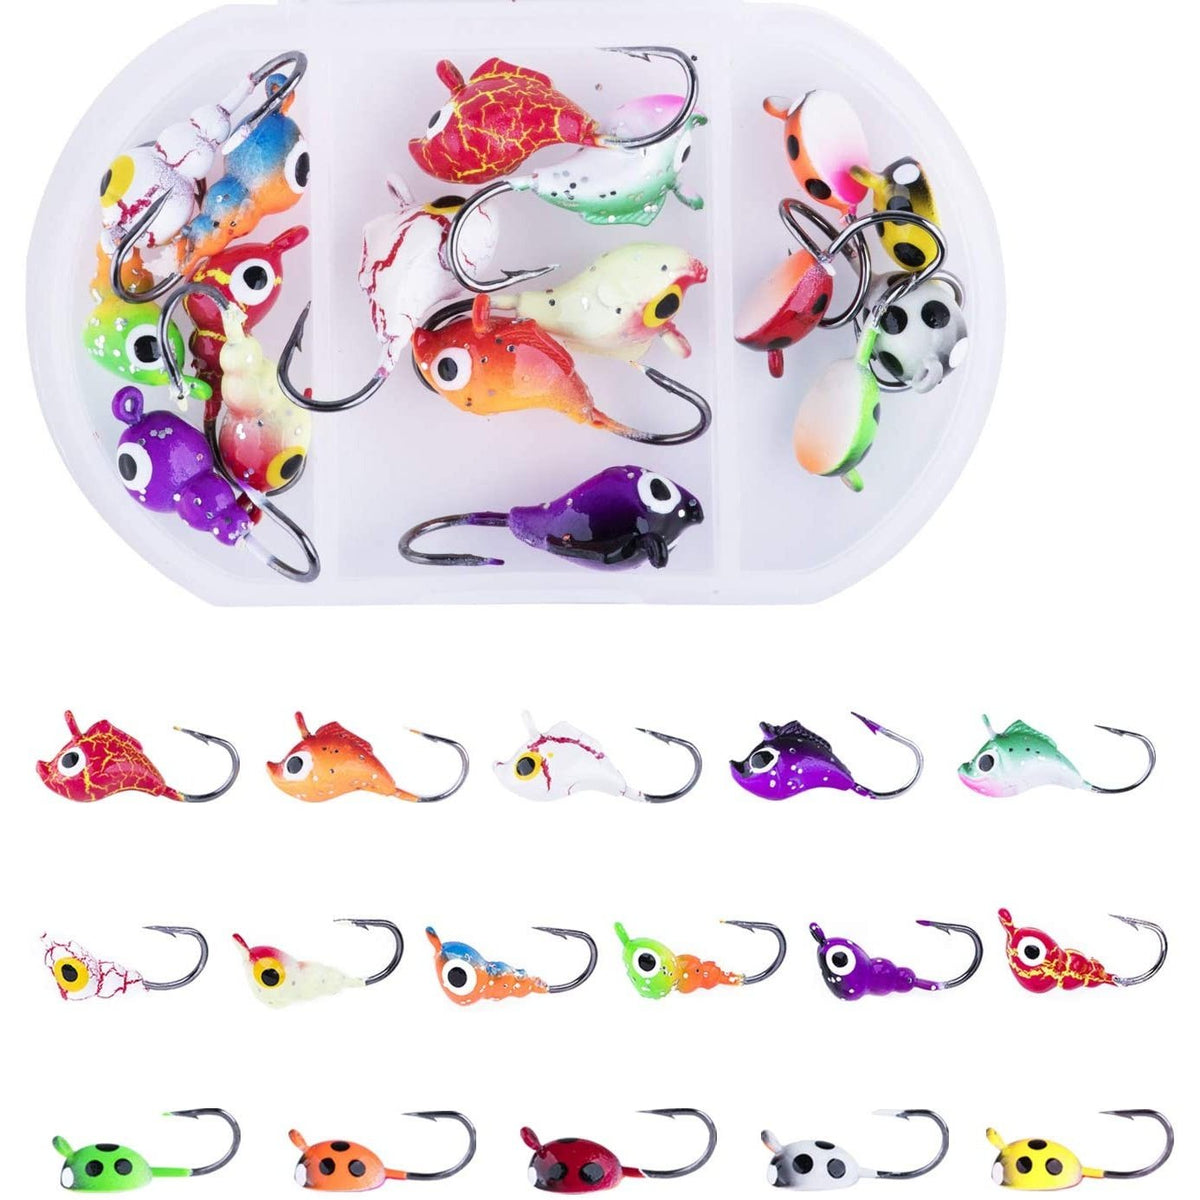 Goture 38pcs Ice Fishing Lures Lot Soft Lures Worm Bait Ice Jigs